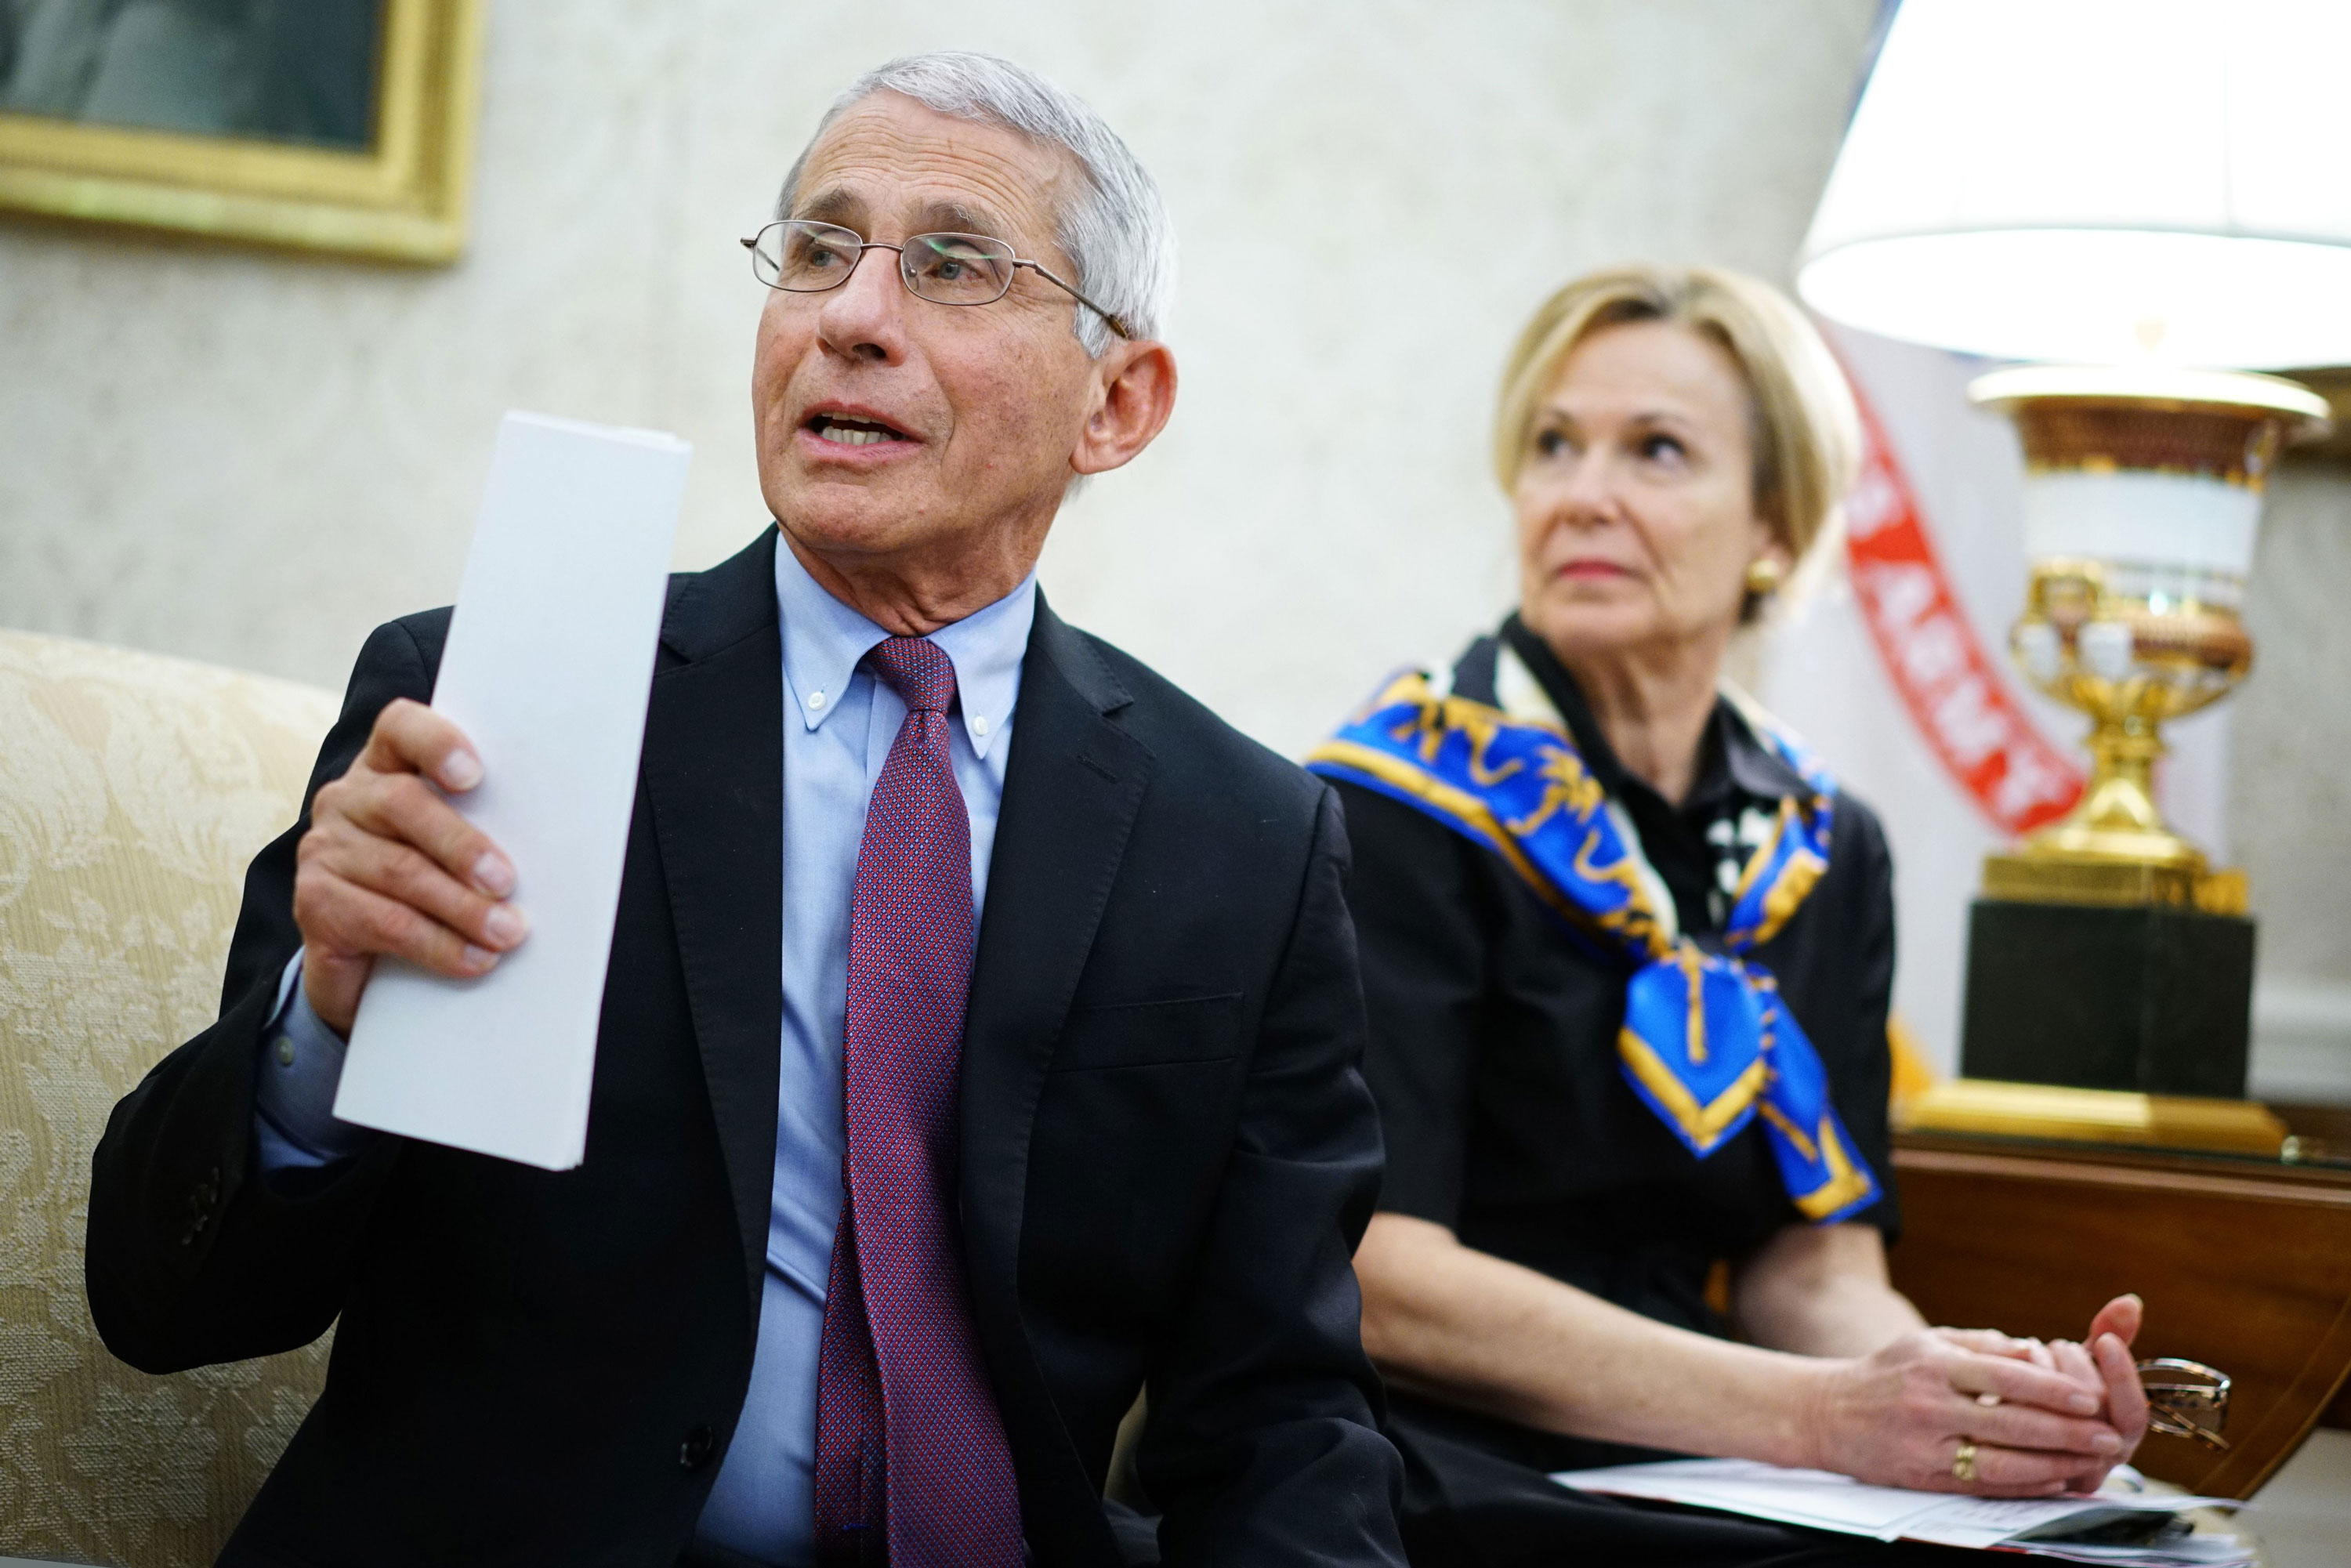 Dr. Anthony Fauci speaks during a meeting with US President Donald Trump and Louisiana Governor John Bel Edwards D-LA in the Oval Office of the White House in Washington, DC on April 29.